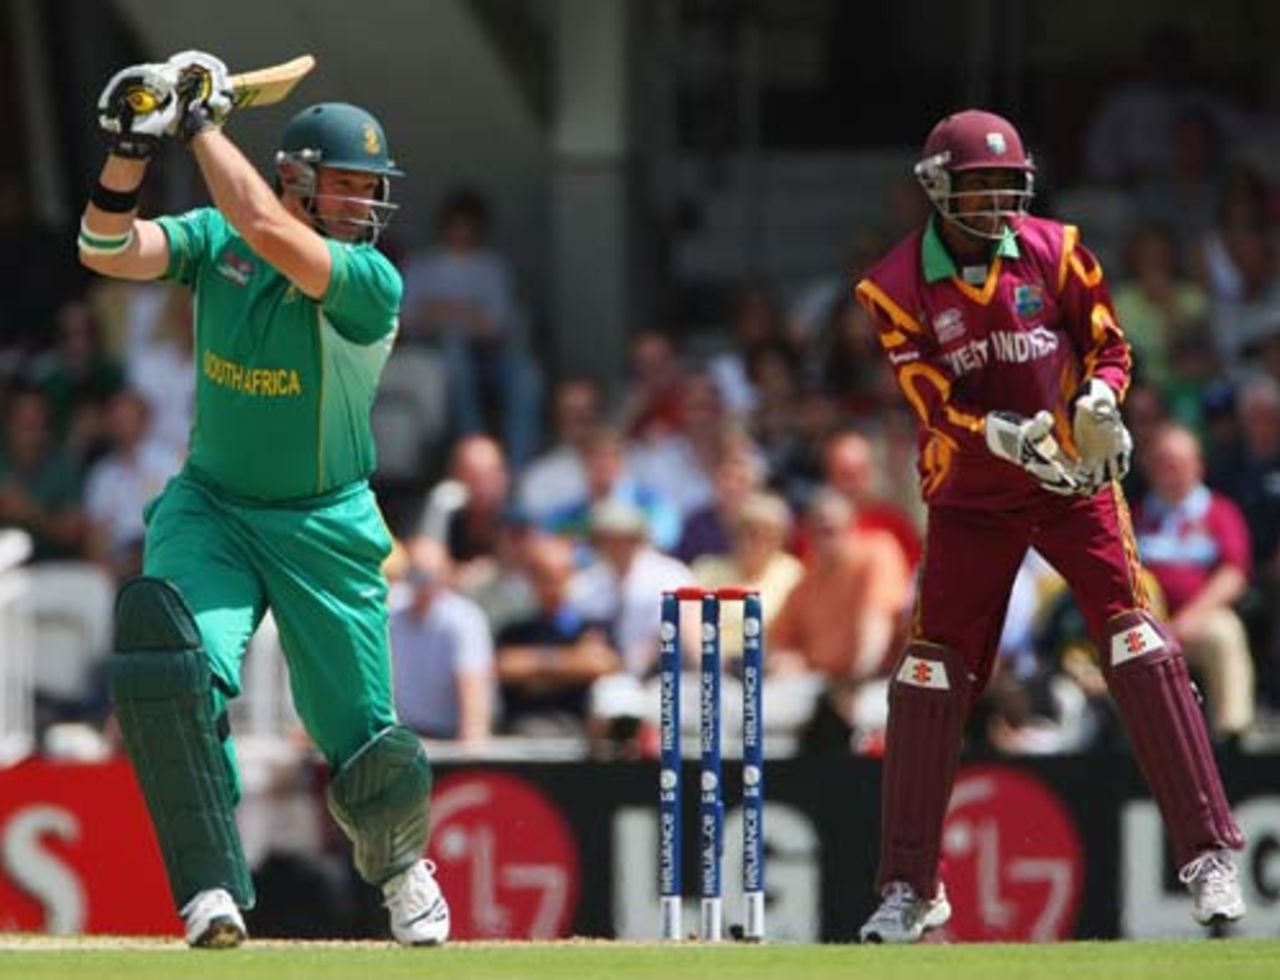 Graeme Smith carves the ball through the off side, South Africa v West Indies, ICC World Twenty20 Super Eights, The Oval, June 13, 2009 